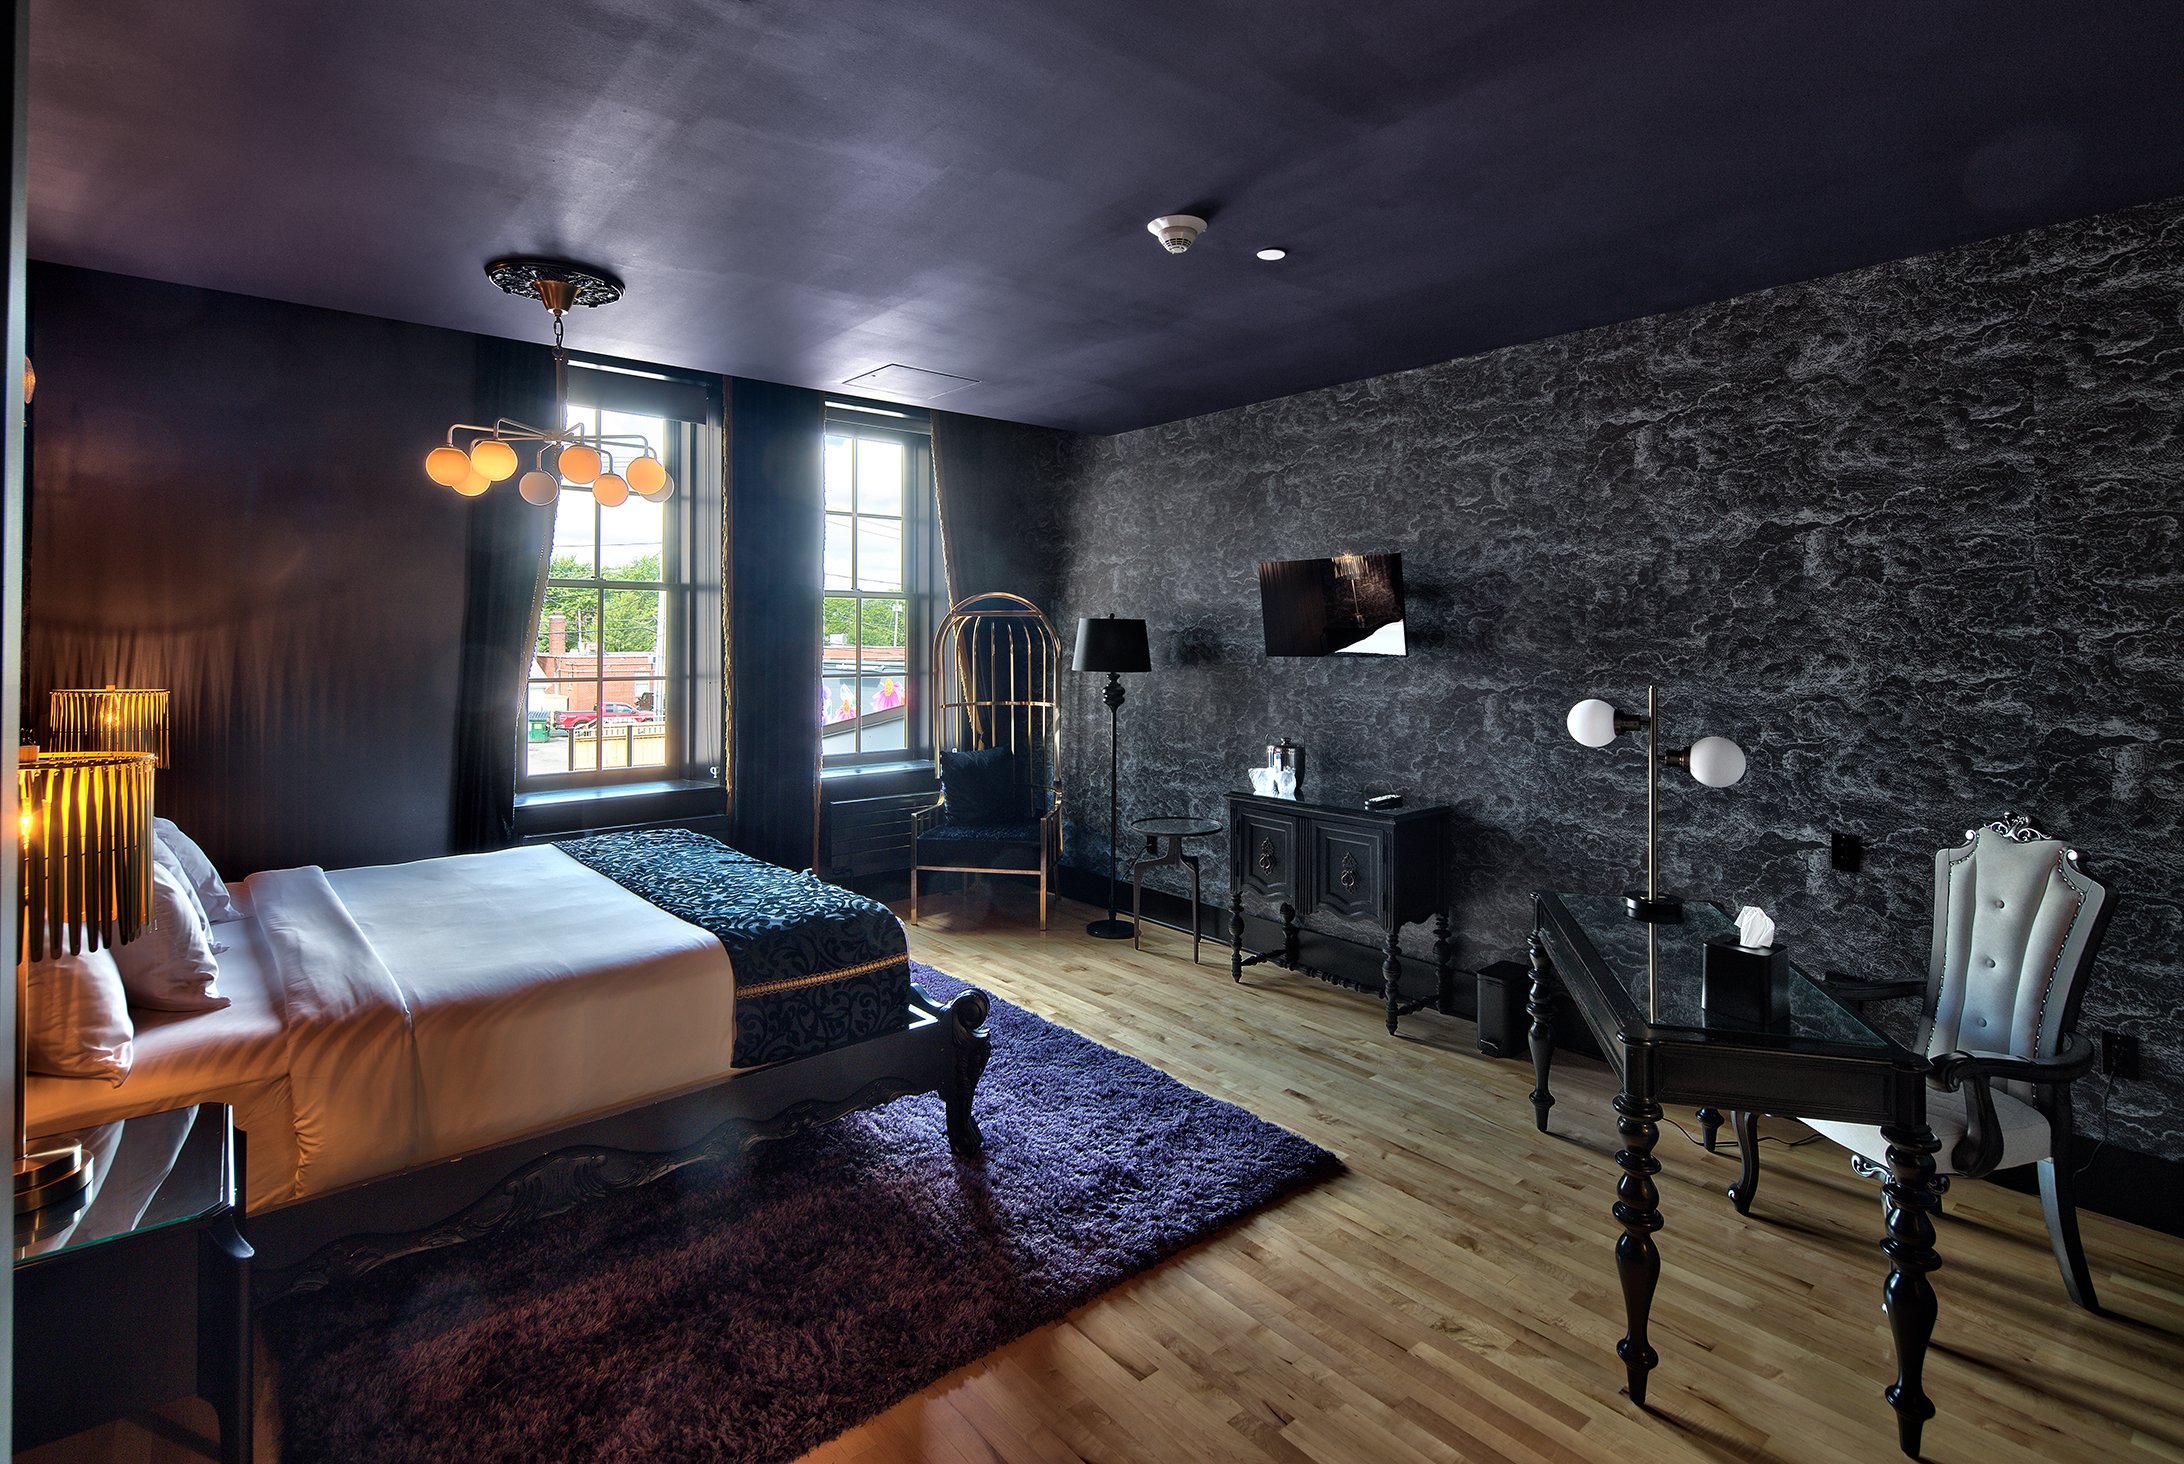 After renovation: Dark Arts hotel room. Photo by Gene Avallone